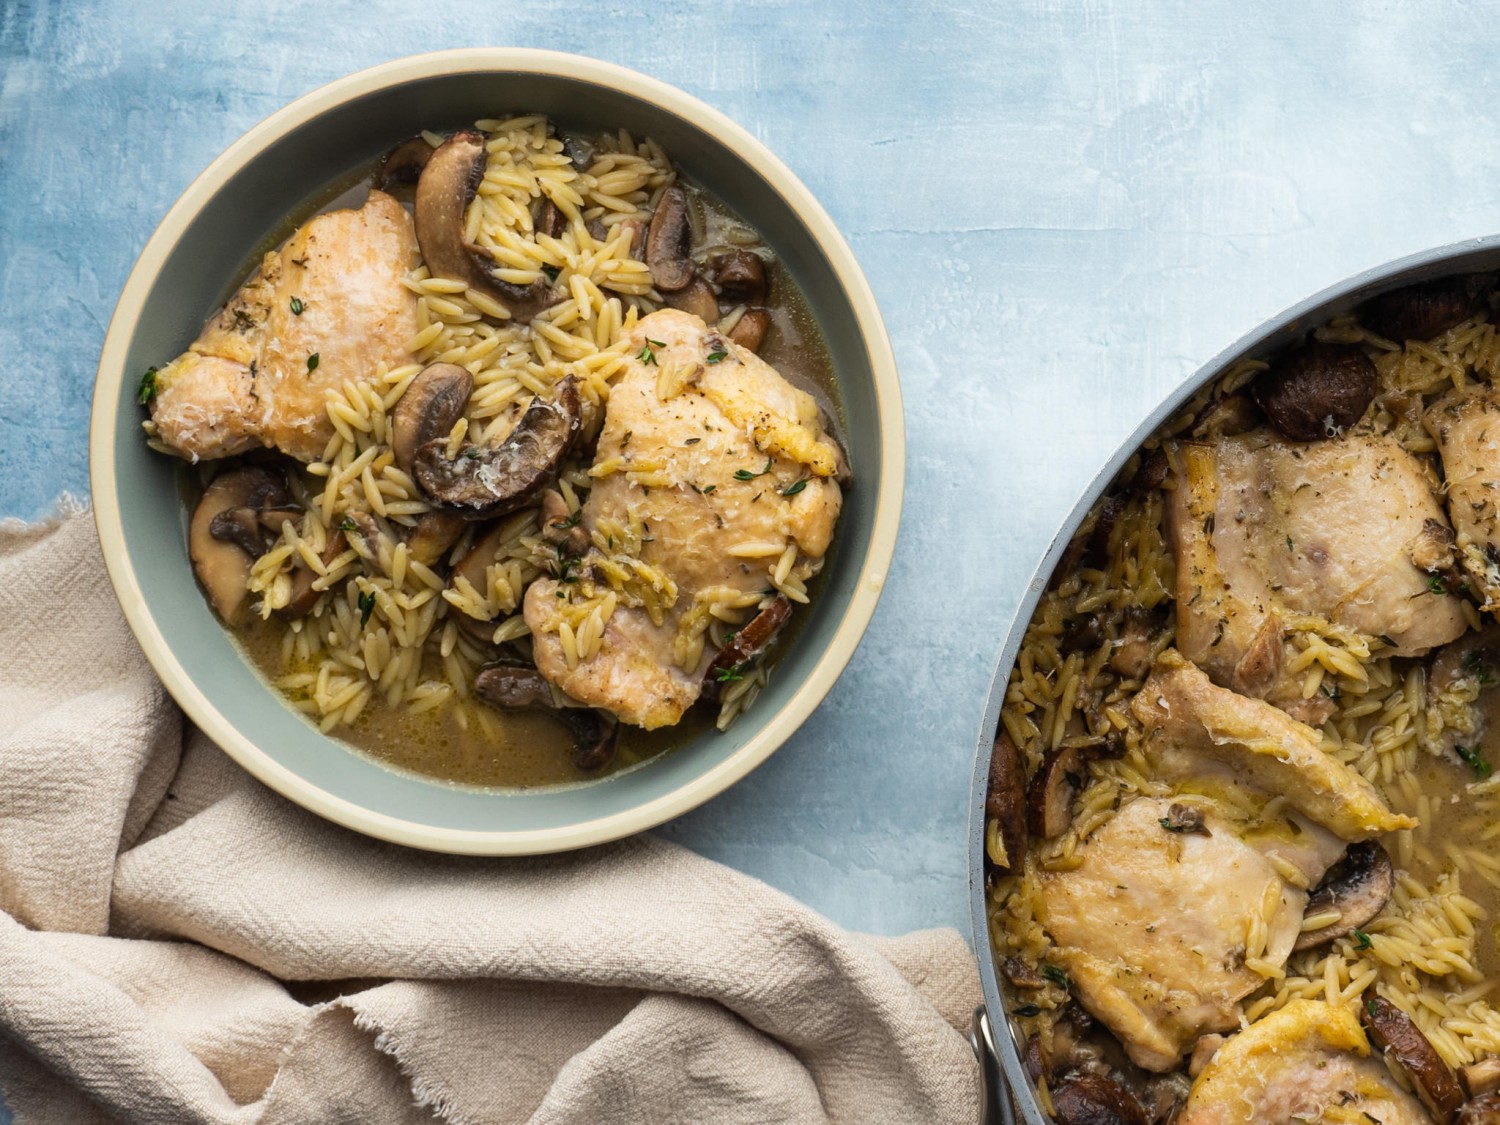 Orzo chicken and mushroom recipe in a serving bowl